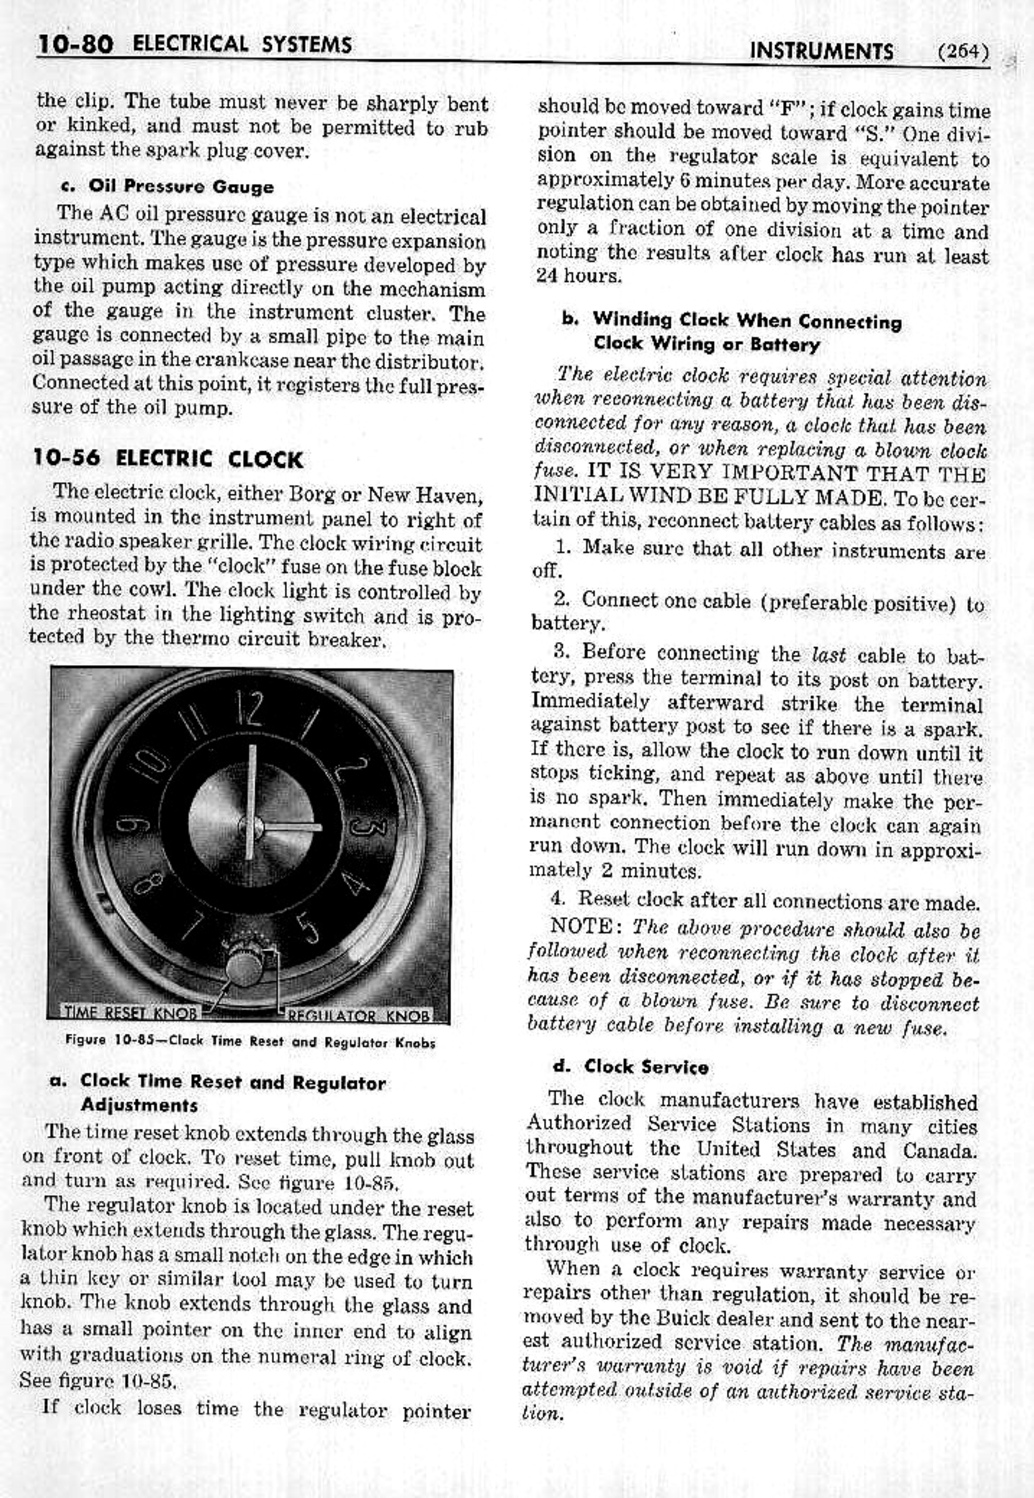 n_11 1953 Buick Shop Manual - Electrical Systems-081-081.jpg